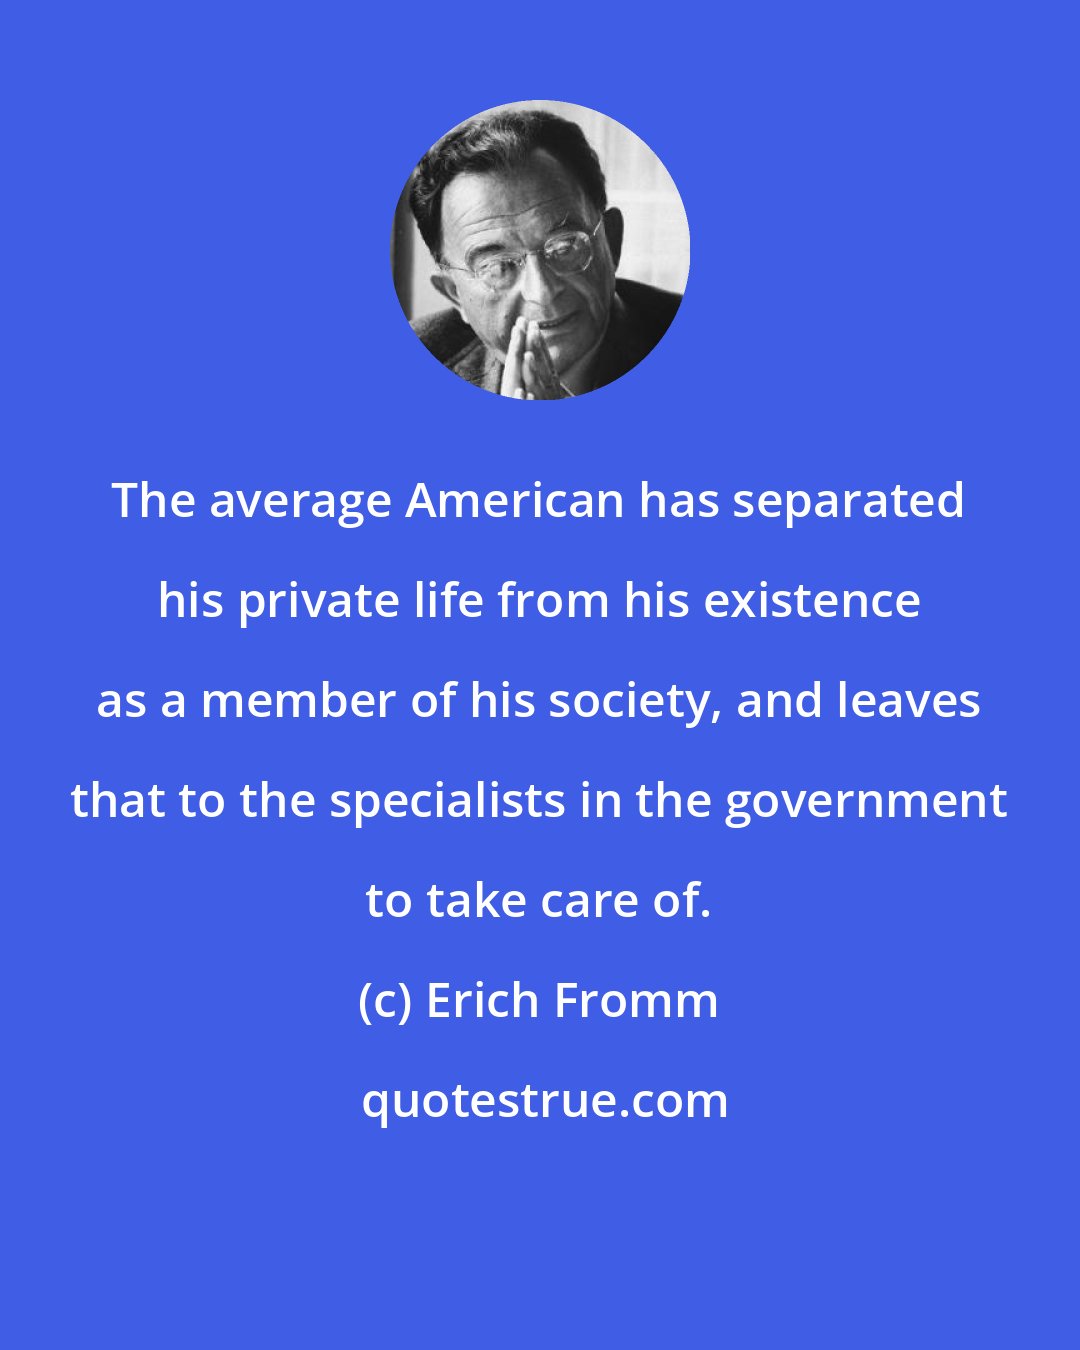 Erich Fromm: The average American has separated his private life from his existence as a member of his society, and leaves that to the specialists in the government to take care of.